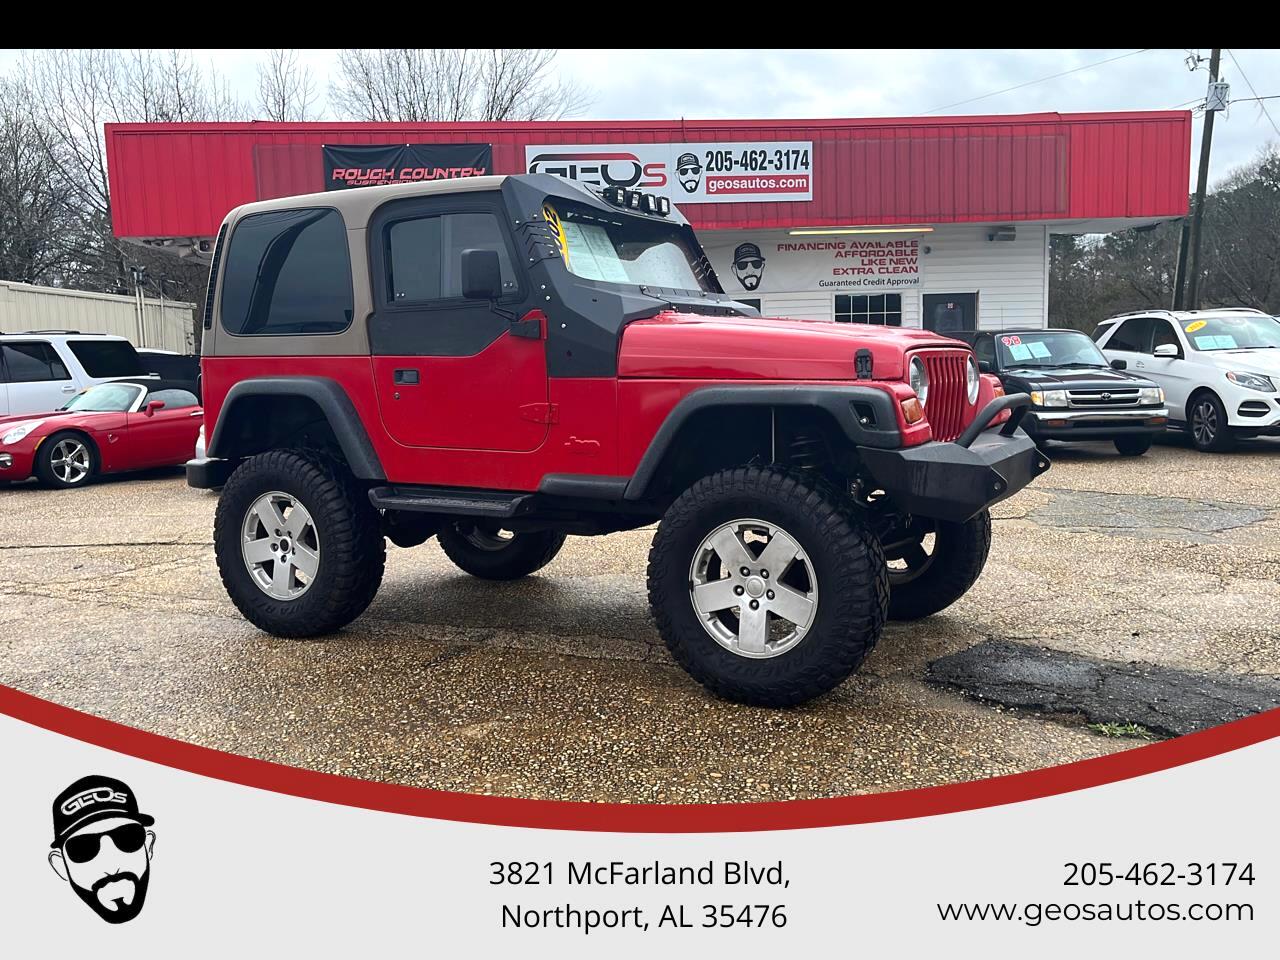 Used 2002 Jeep Wrangler 2dr X for Sale in Northport AL 35473 Geos Autos